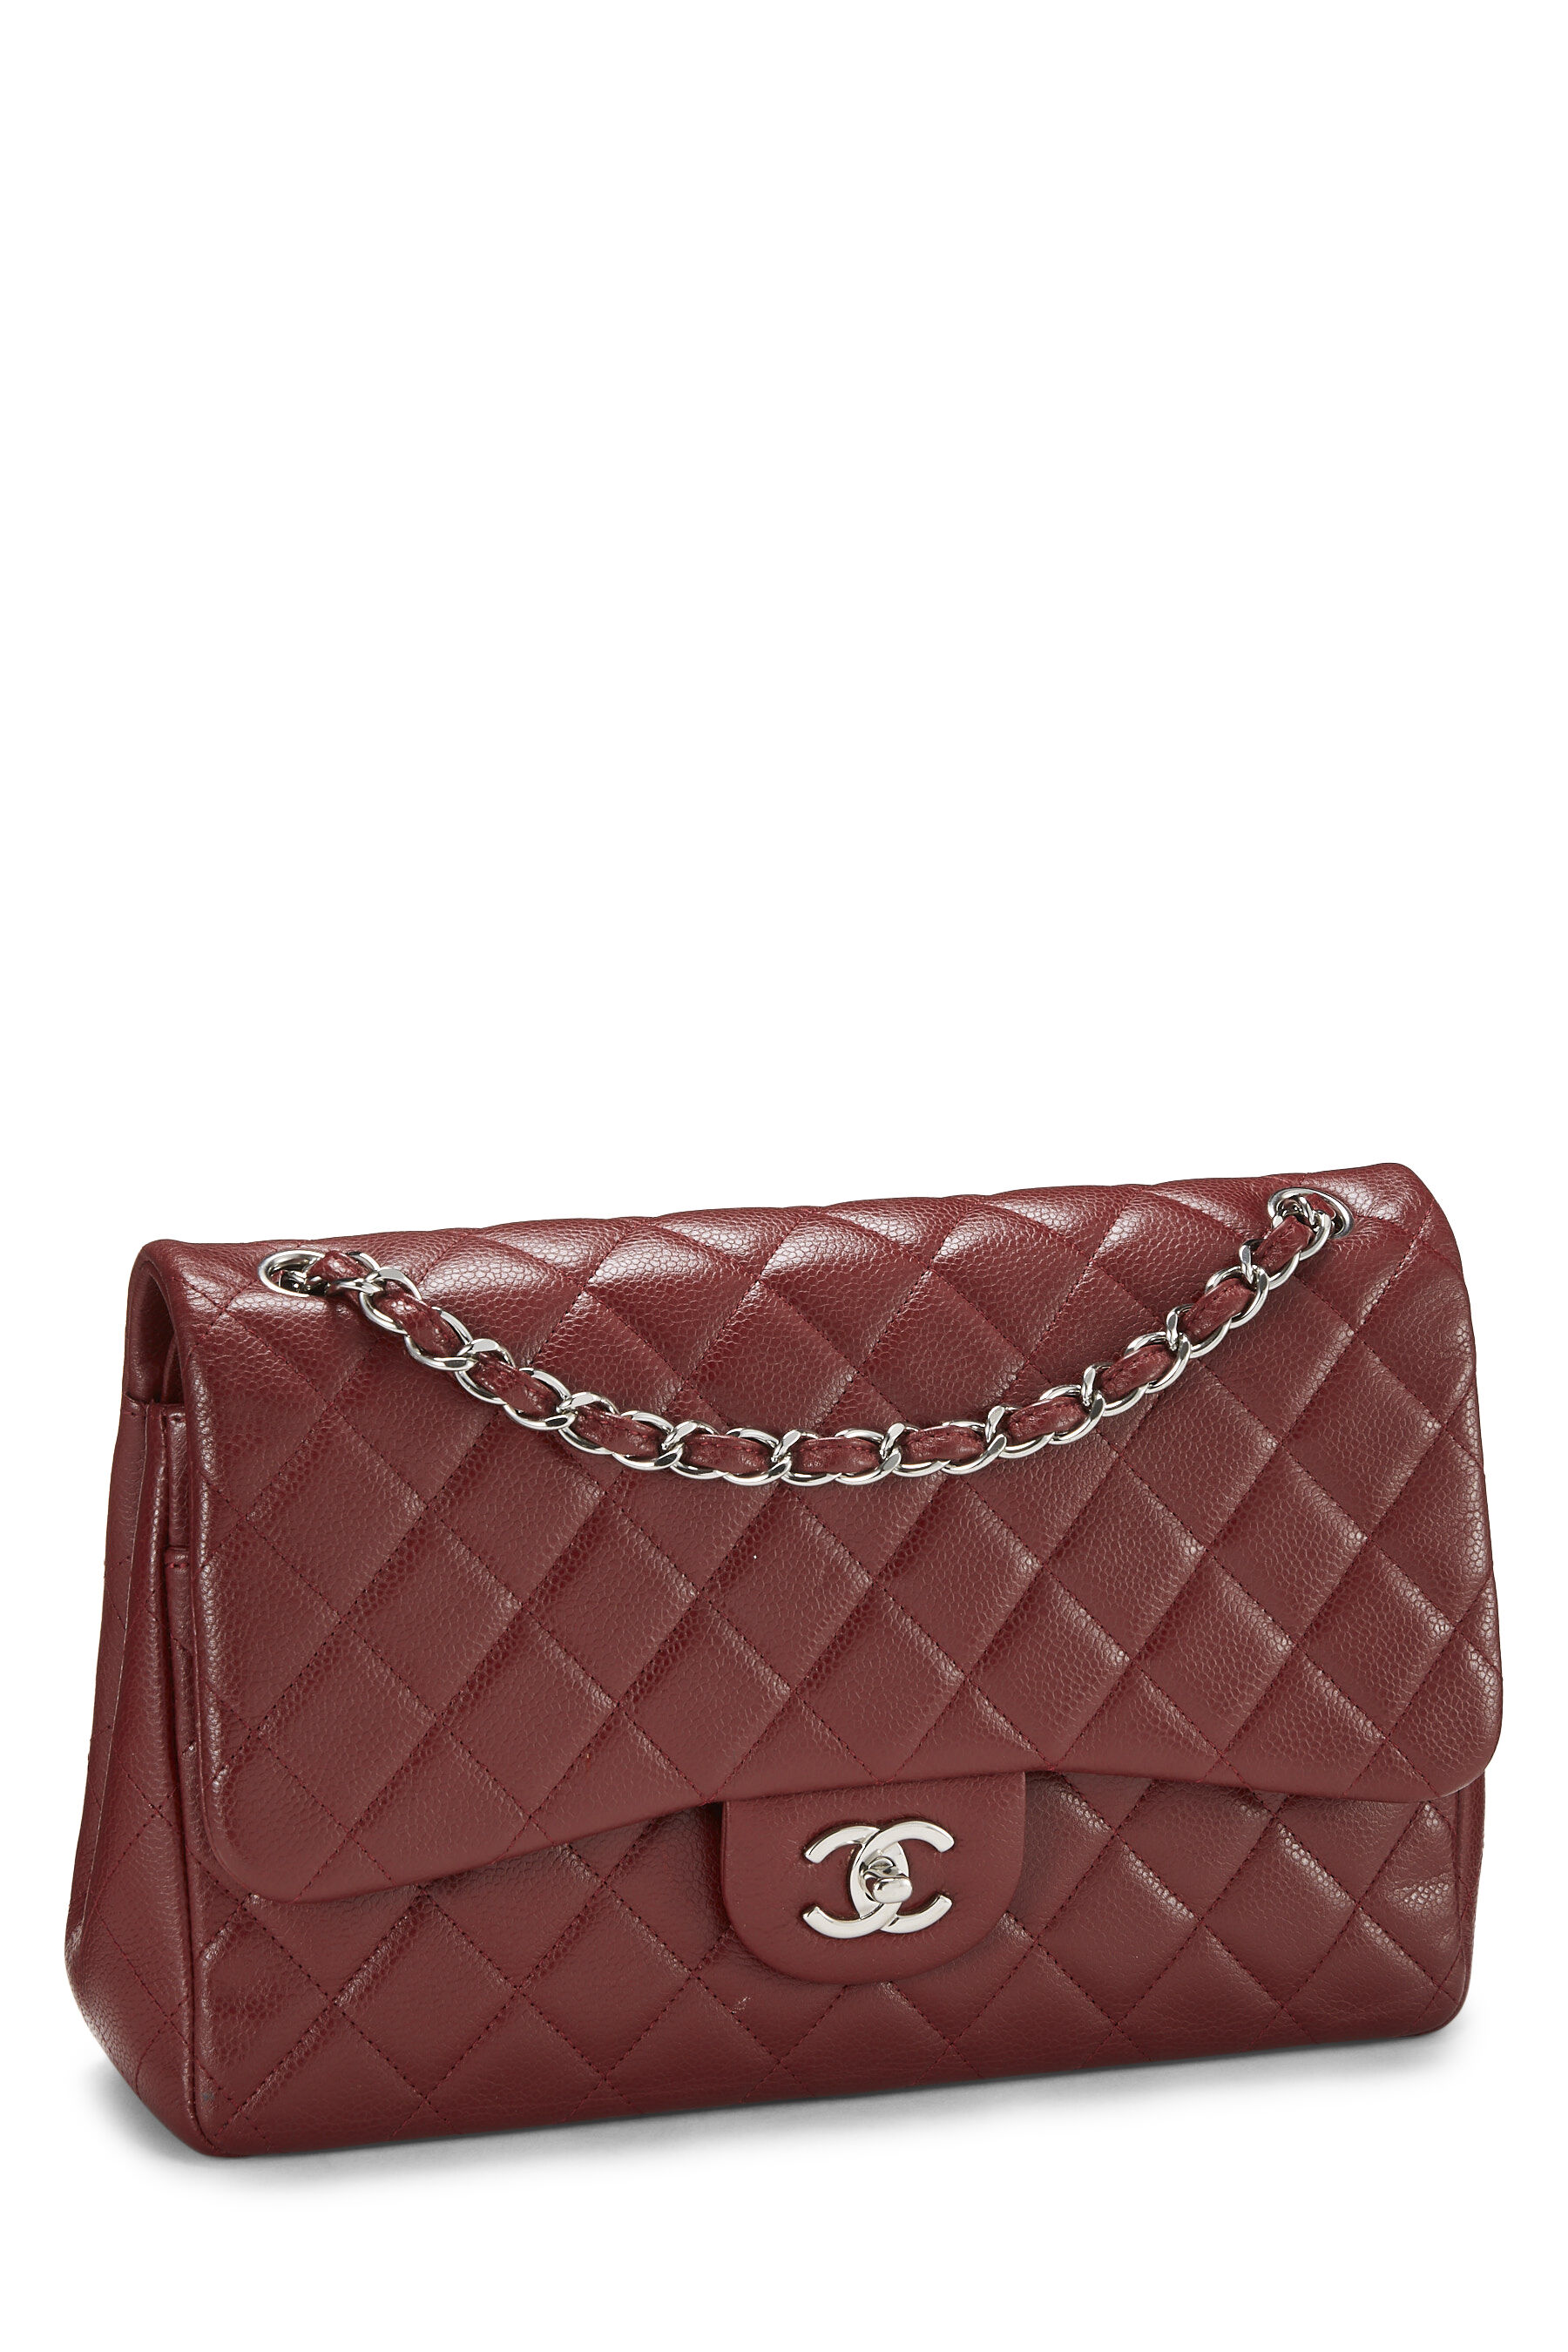 Chanel - Burgundy Quilted Caviar New Classic Flap Jumbo